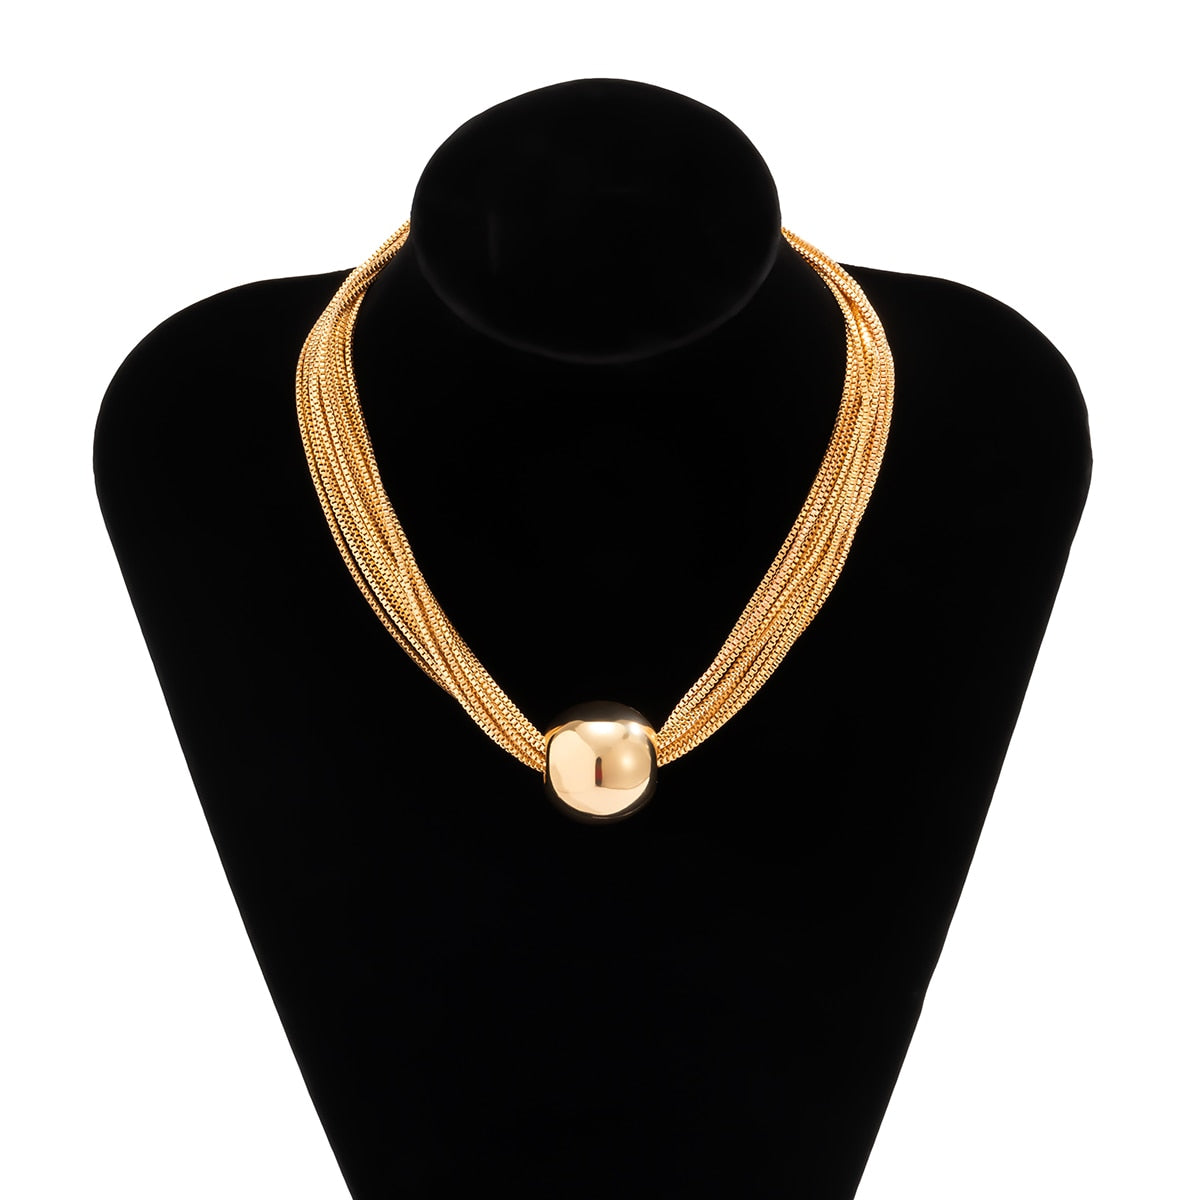 Twisted Chunky Chain Necklace For Women